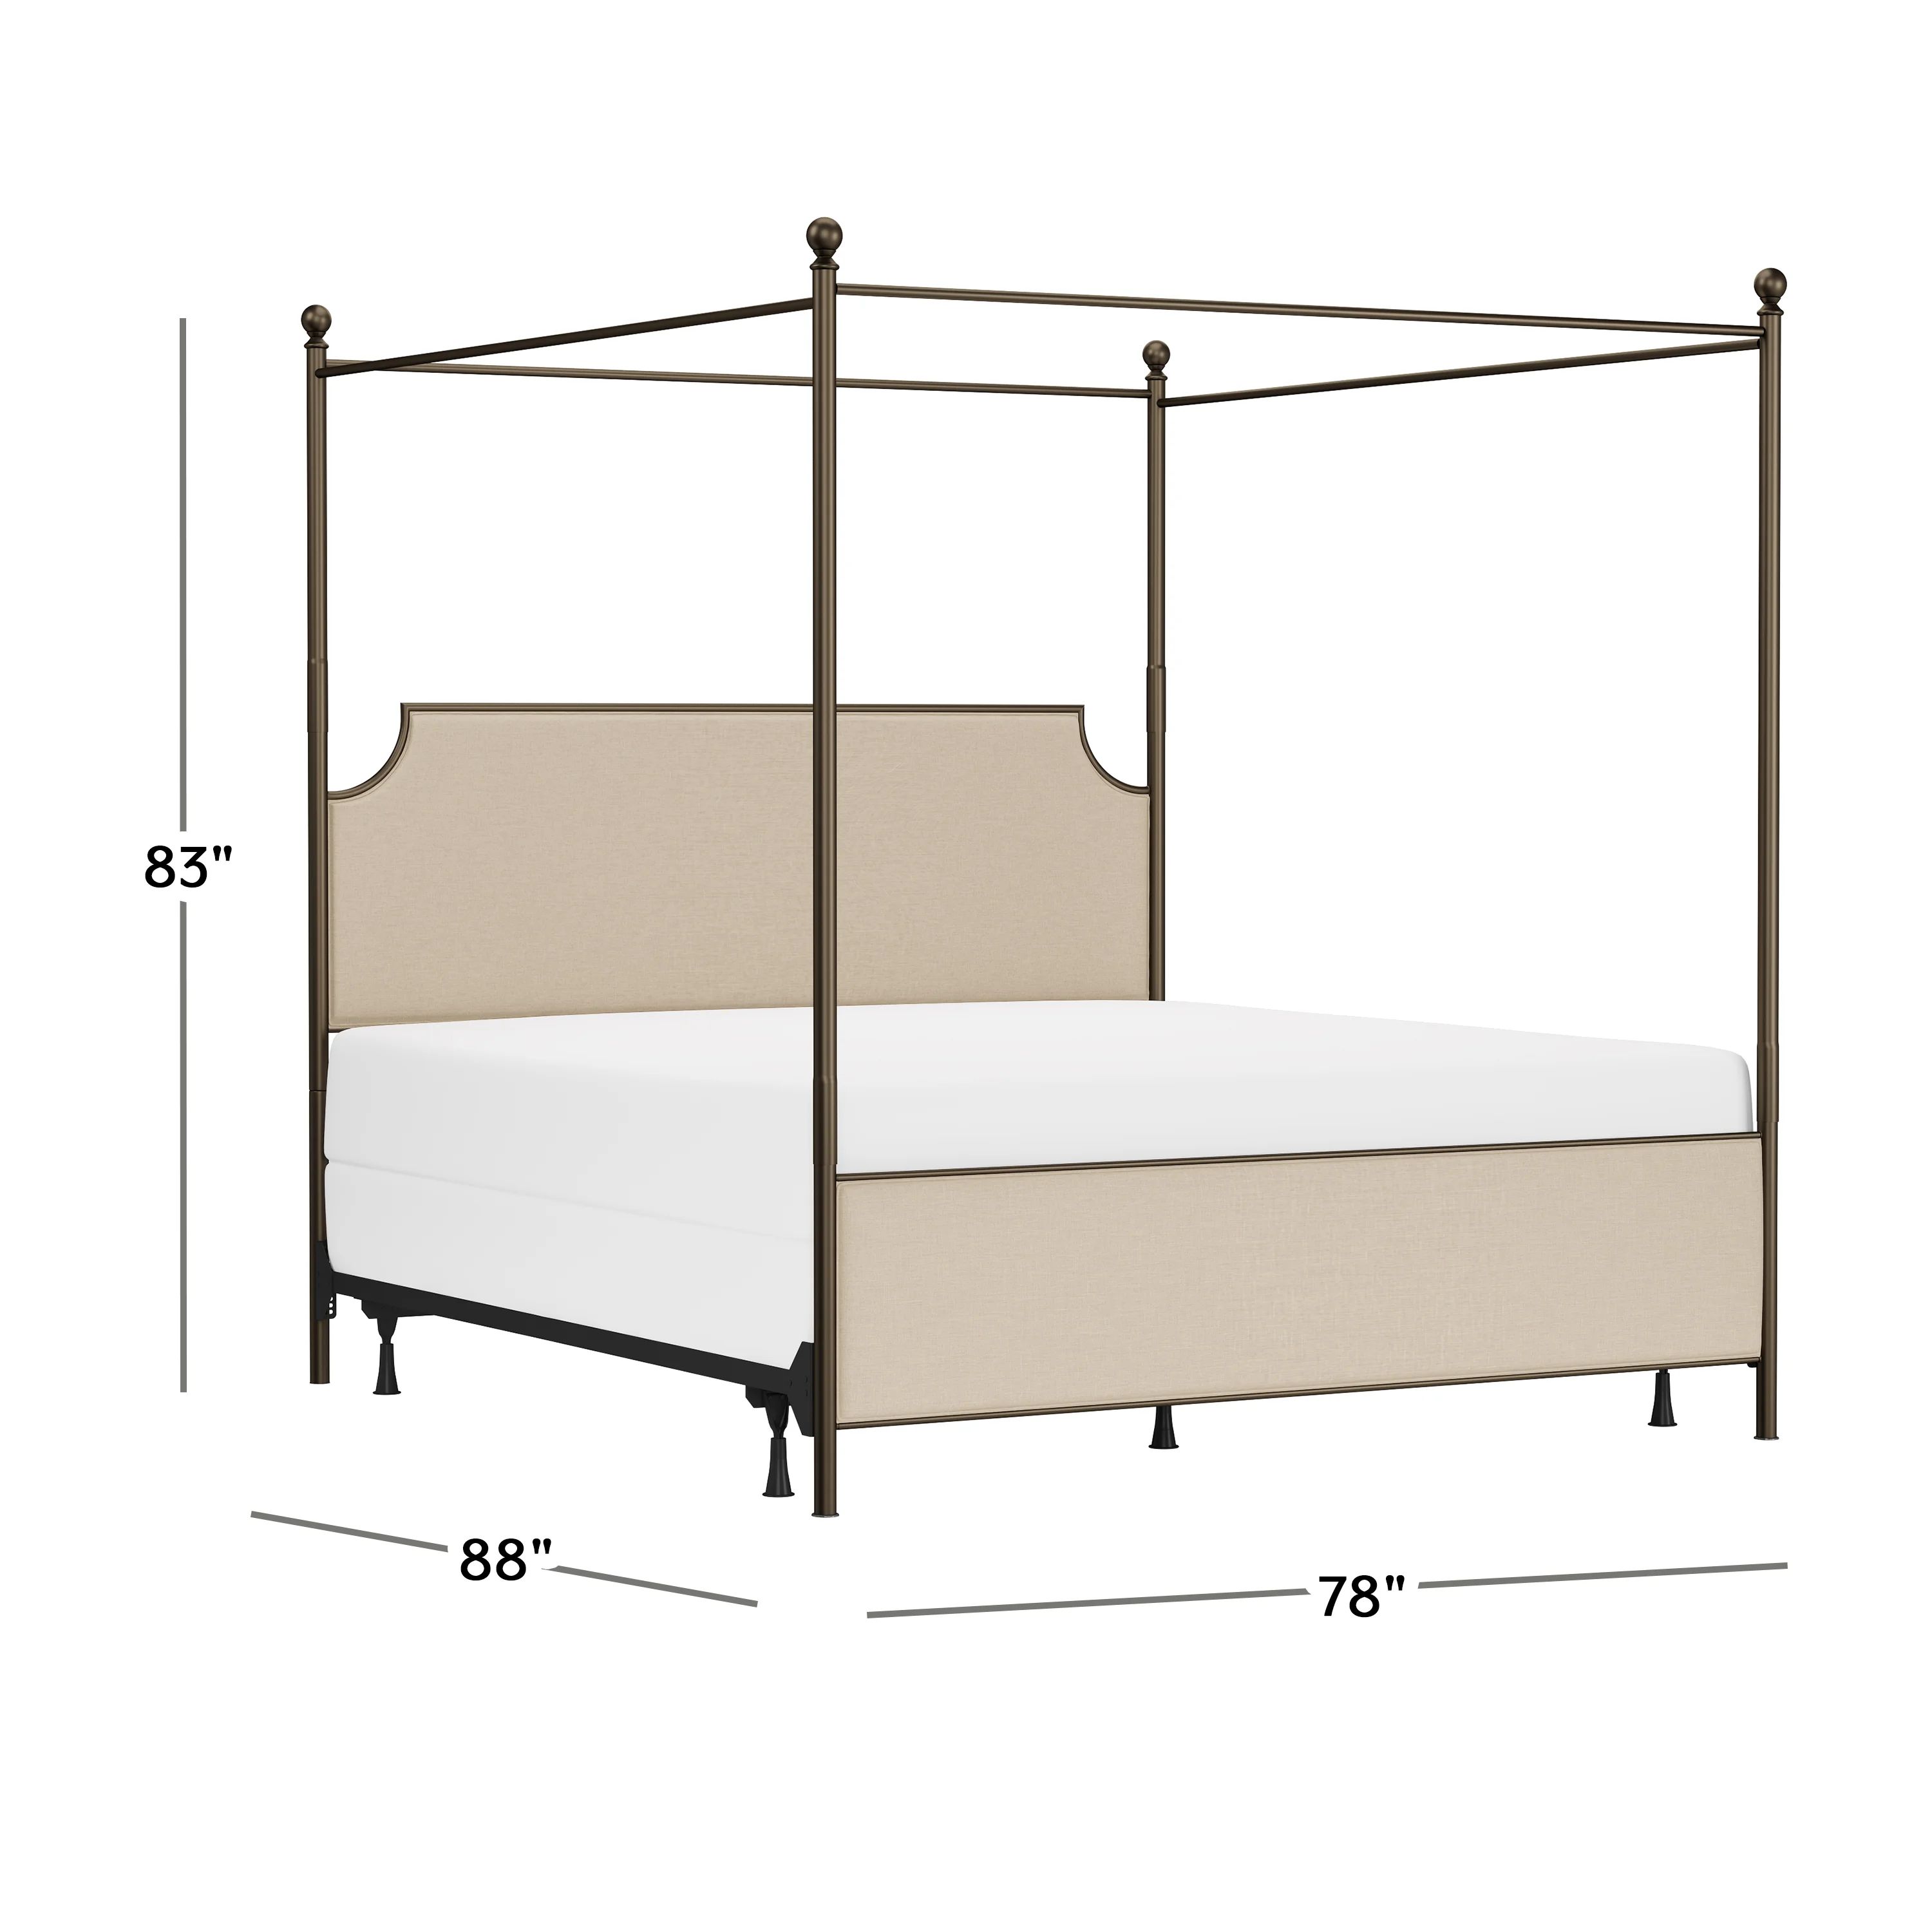 Nordland Low Profile Canopy Bed | Wayfair North America